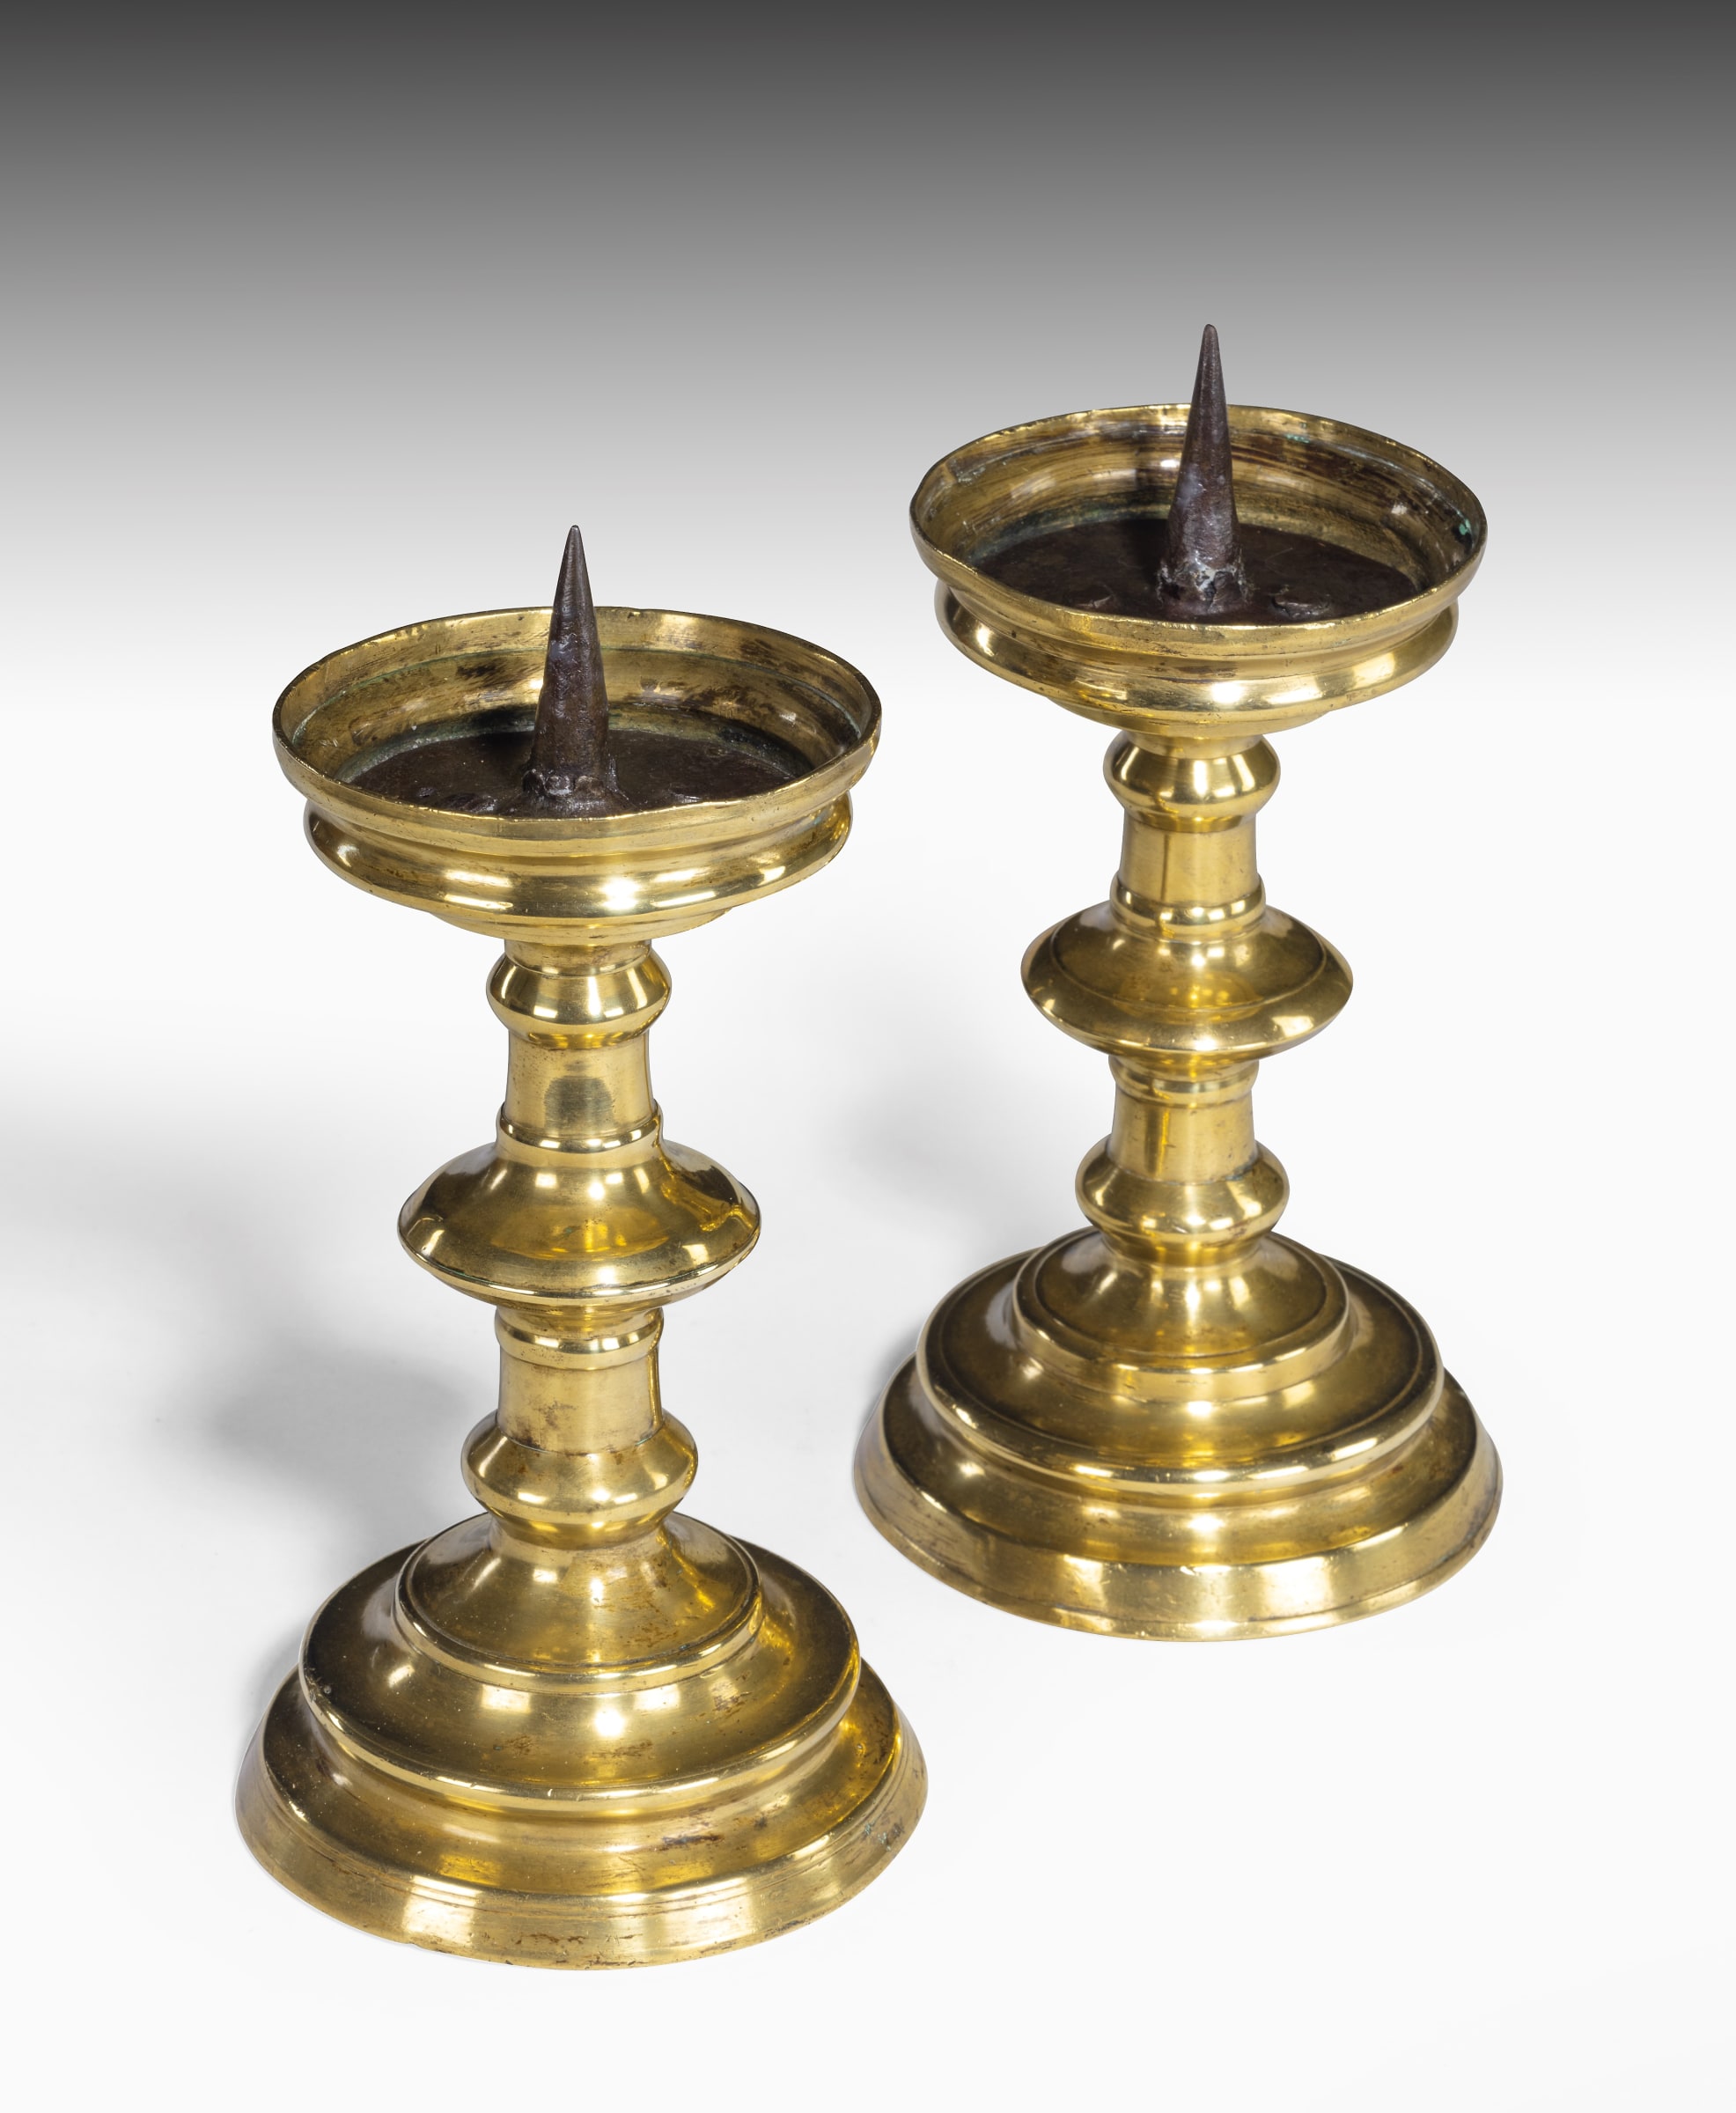 Rare Pair of Victorian Solid Brass Gothic Candlesticks